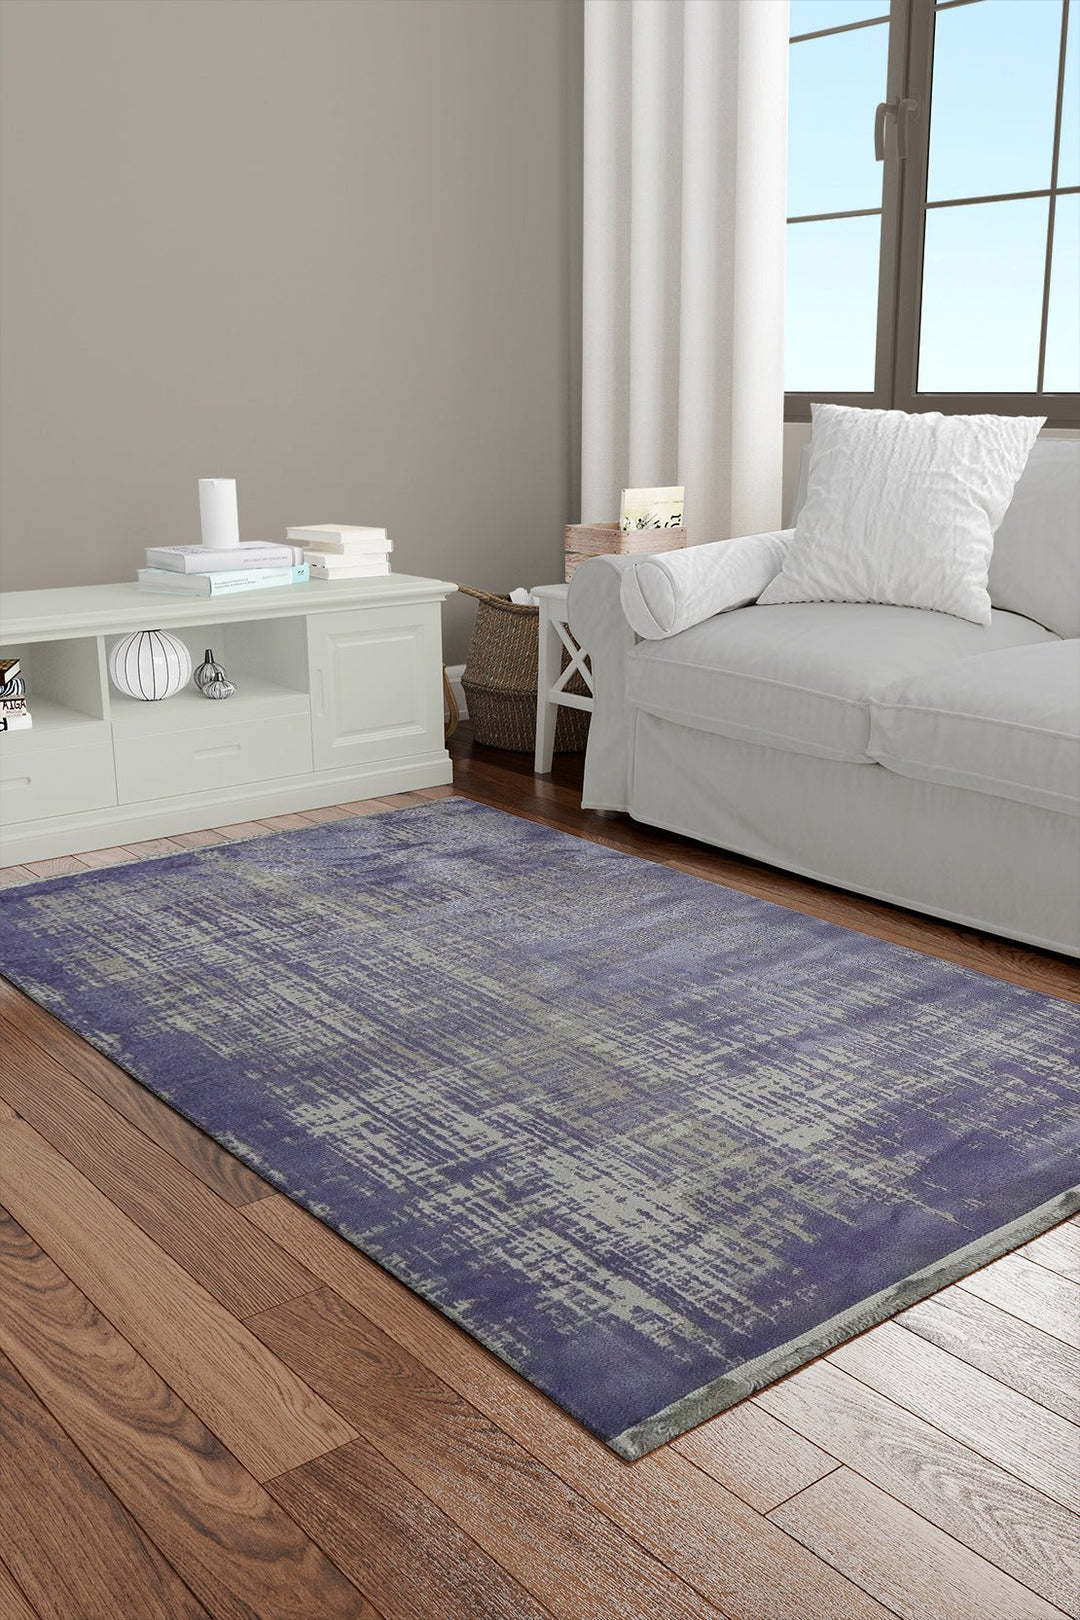 Turkish Modern Festival 1 Rug - 3.93 x 5.90 FT - Gray and Blue - Superior Comfort, Modern Style Accent Rugs - V Surfaces